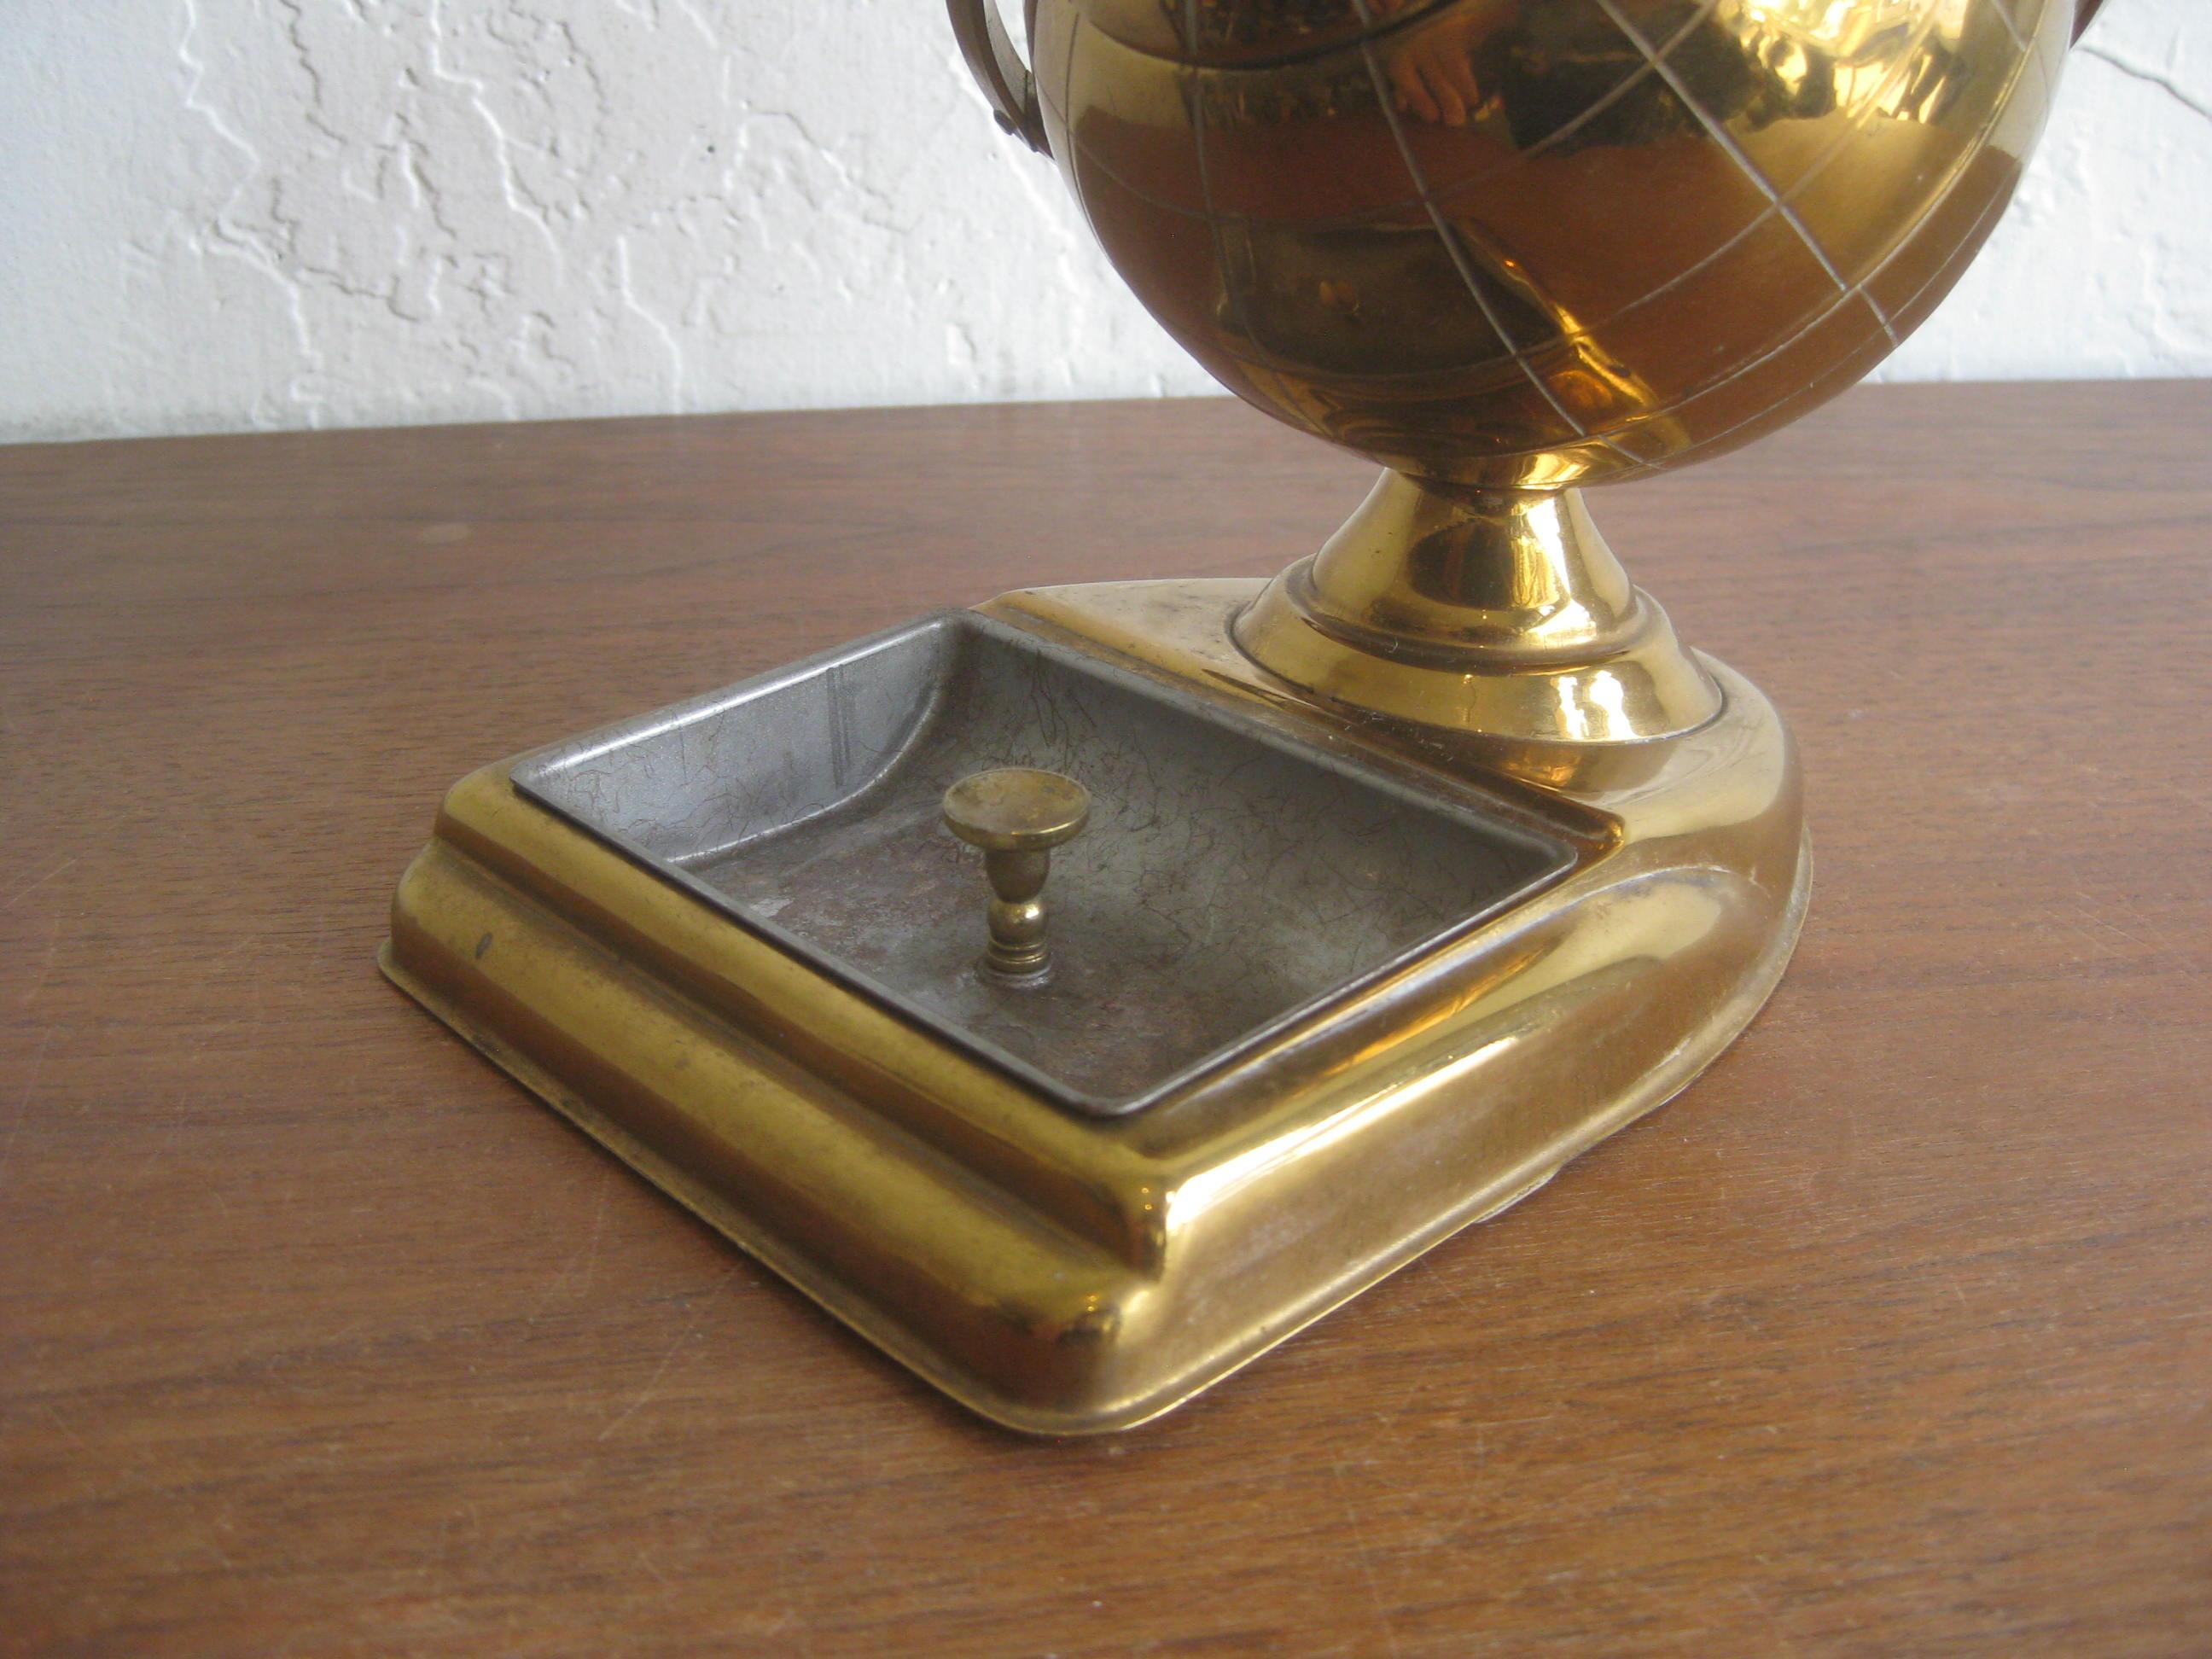 Brass figural globe cigarette holder and ashtray caddy, circa 1950s. Would make a great office desk accessory. Wonderful midcentury design. Nice patina and could polish up if desired. Opens as it should to store cigarettes inside the globe. In very